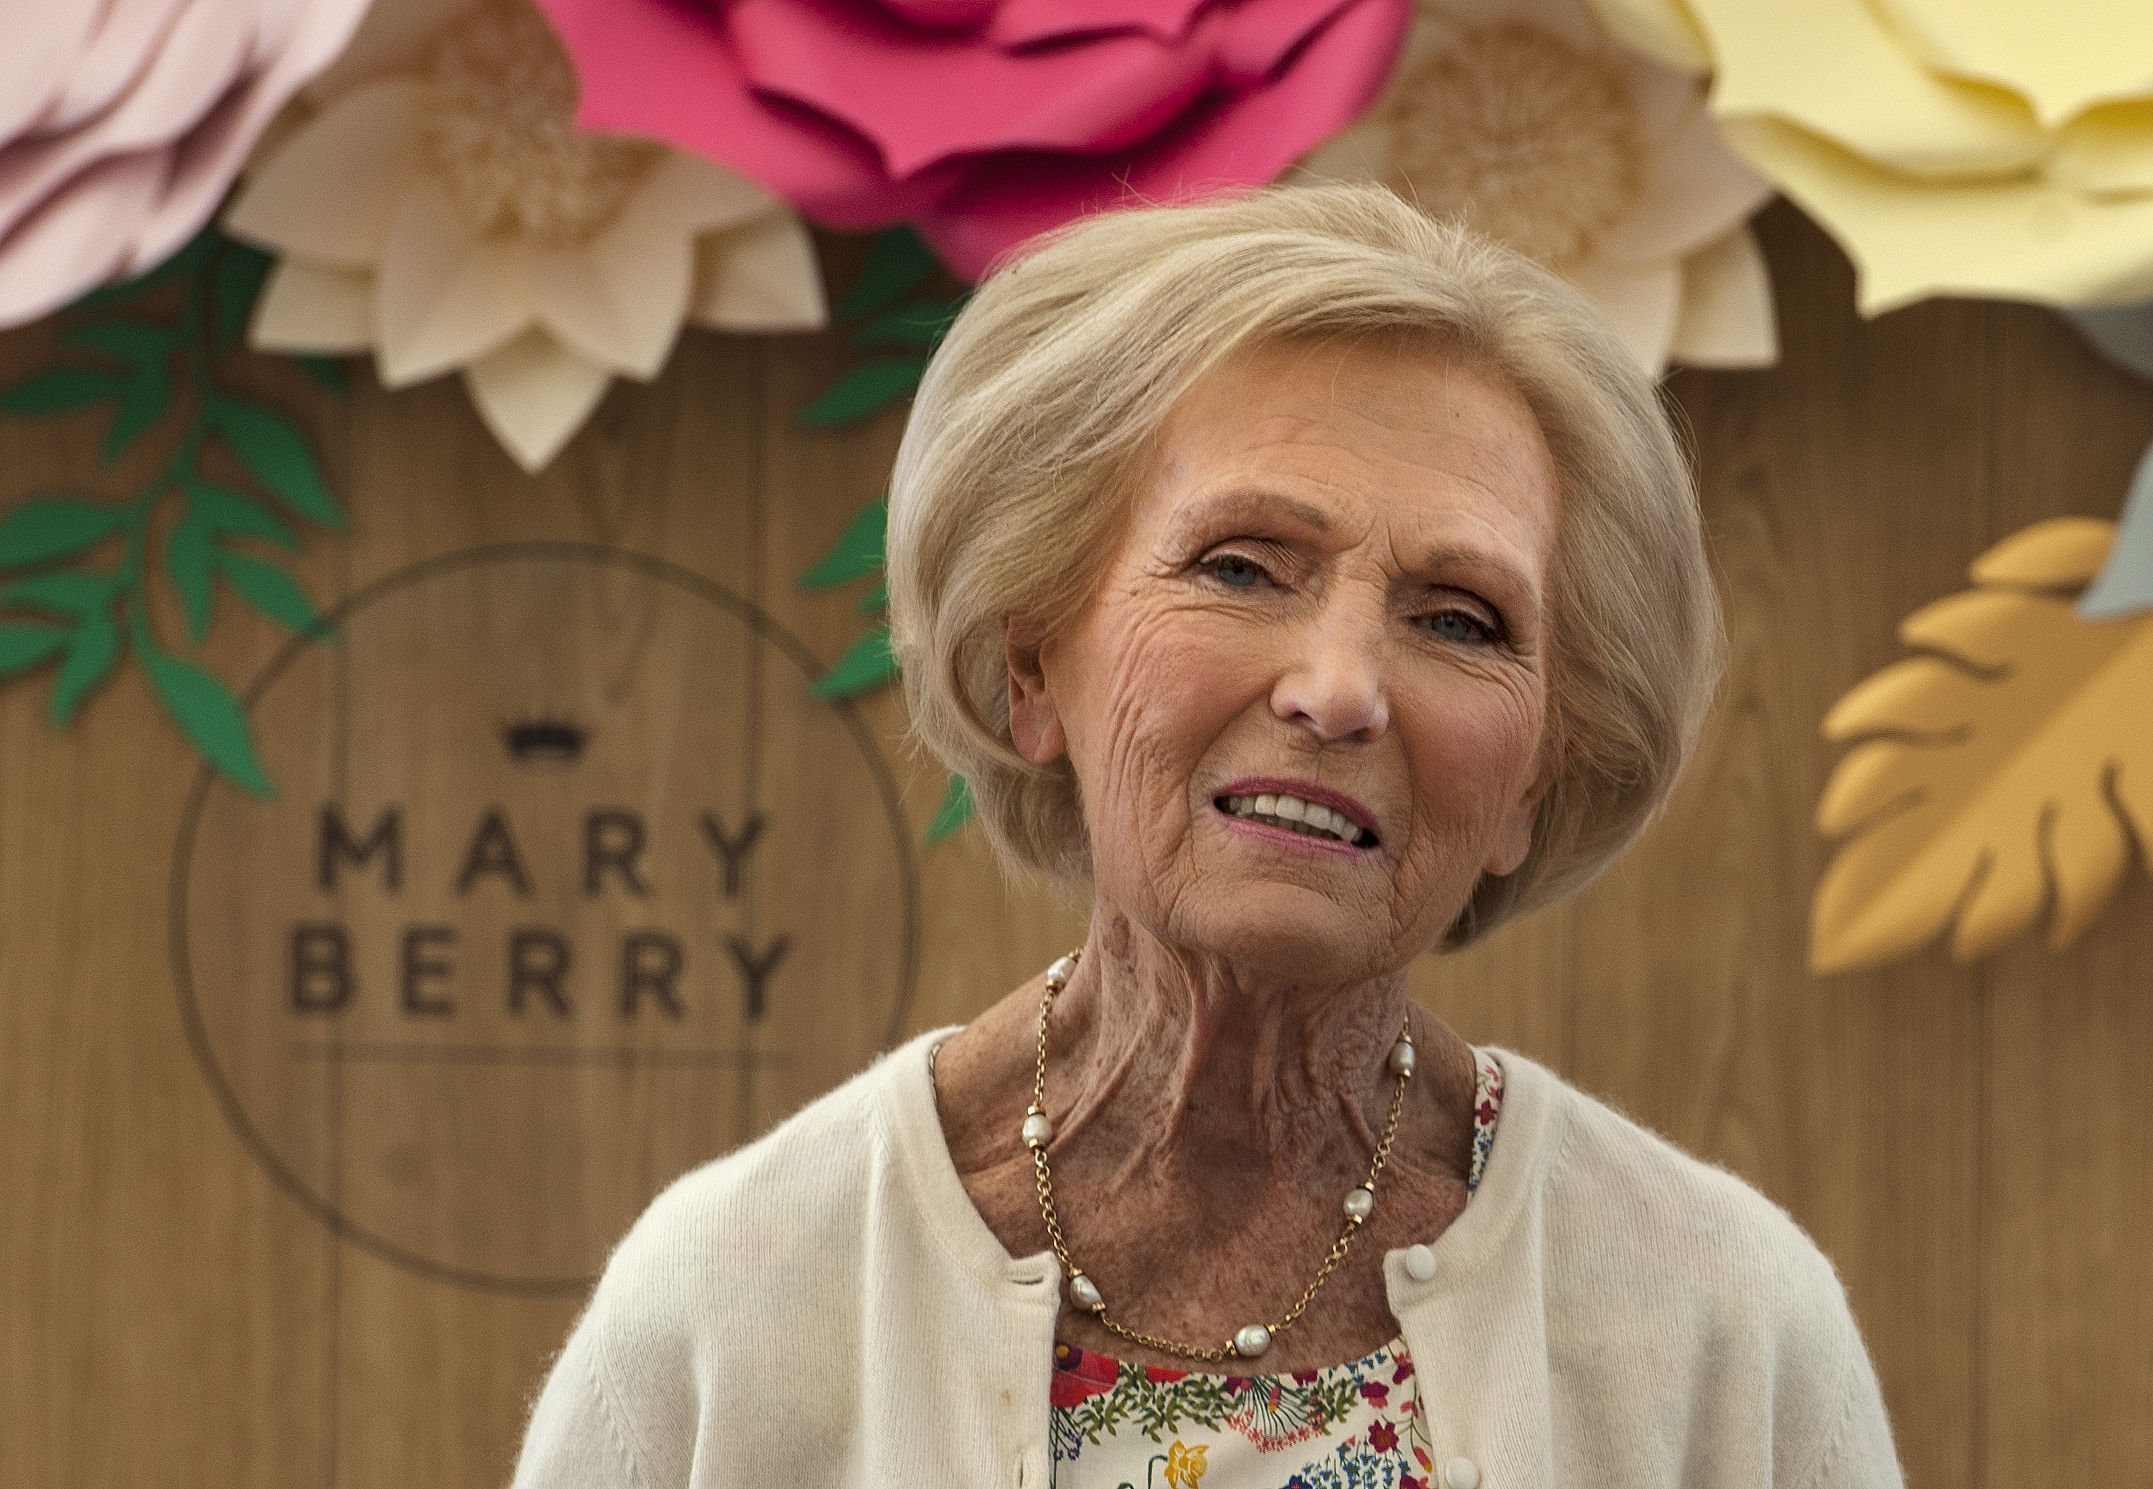 Mary Berry meets Hugh Jackman | Style Notes